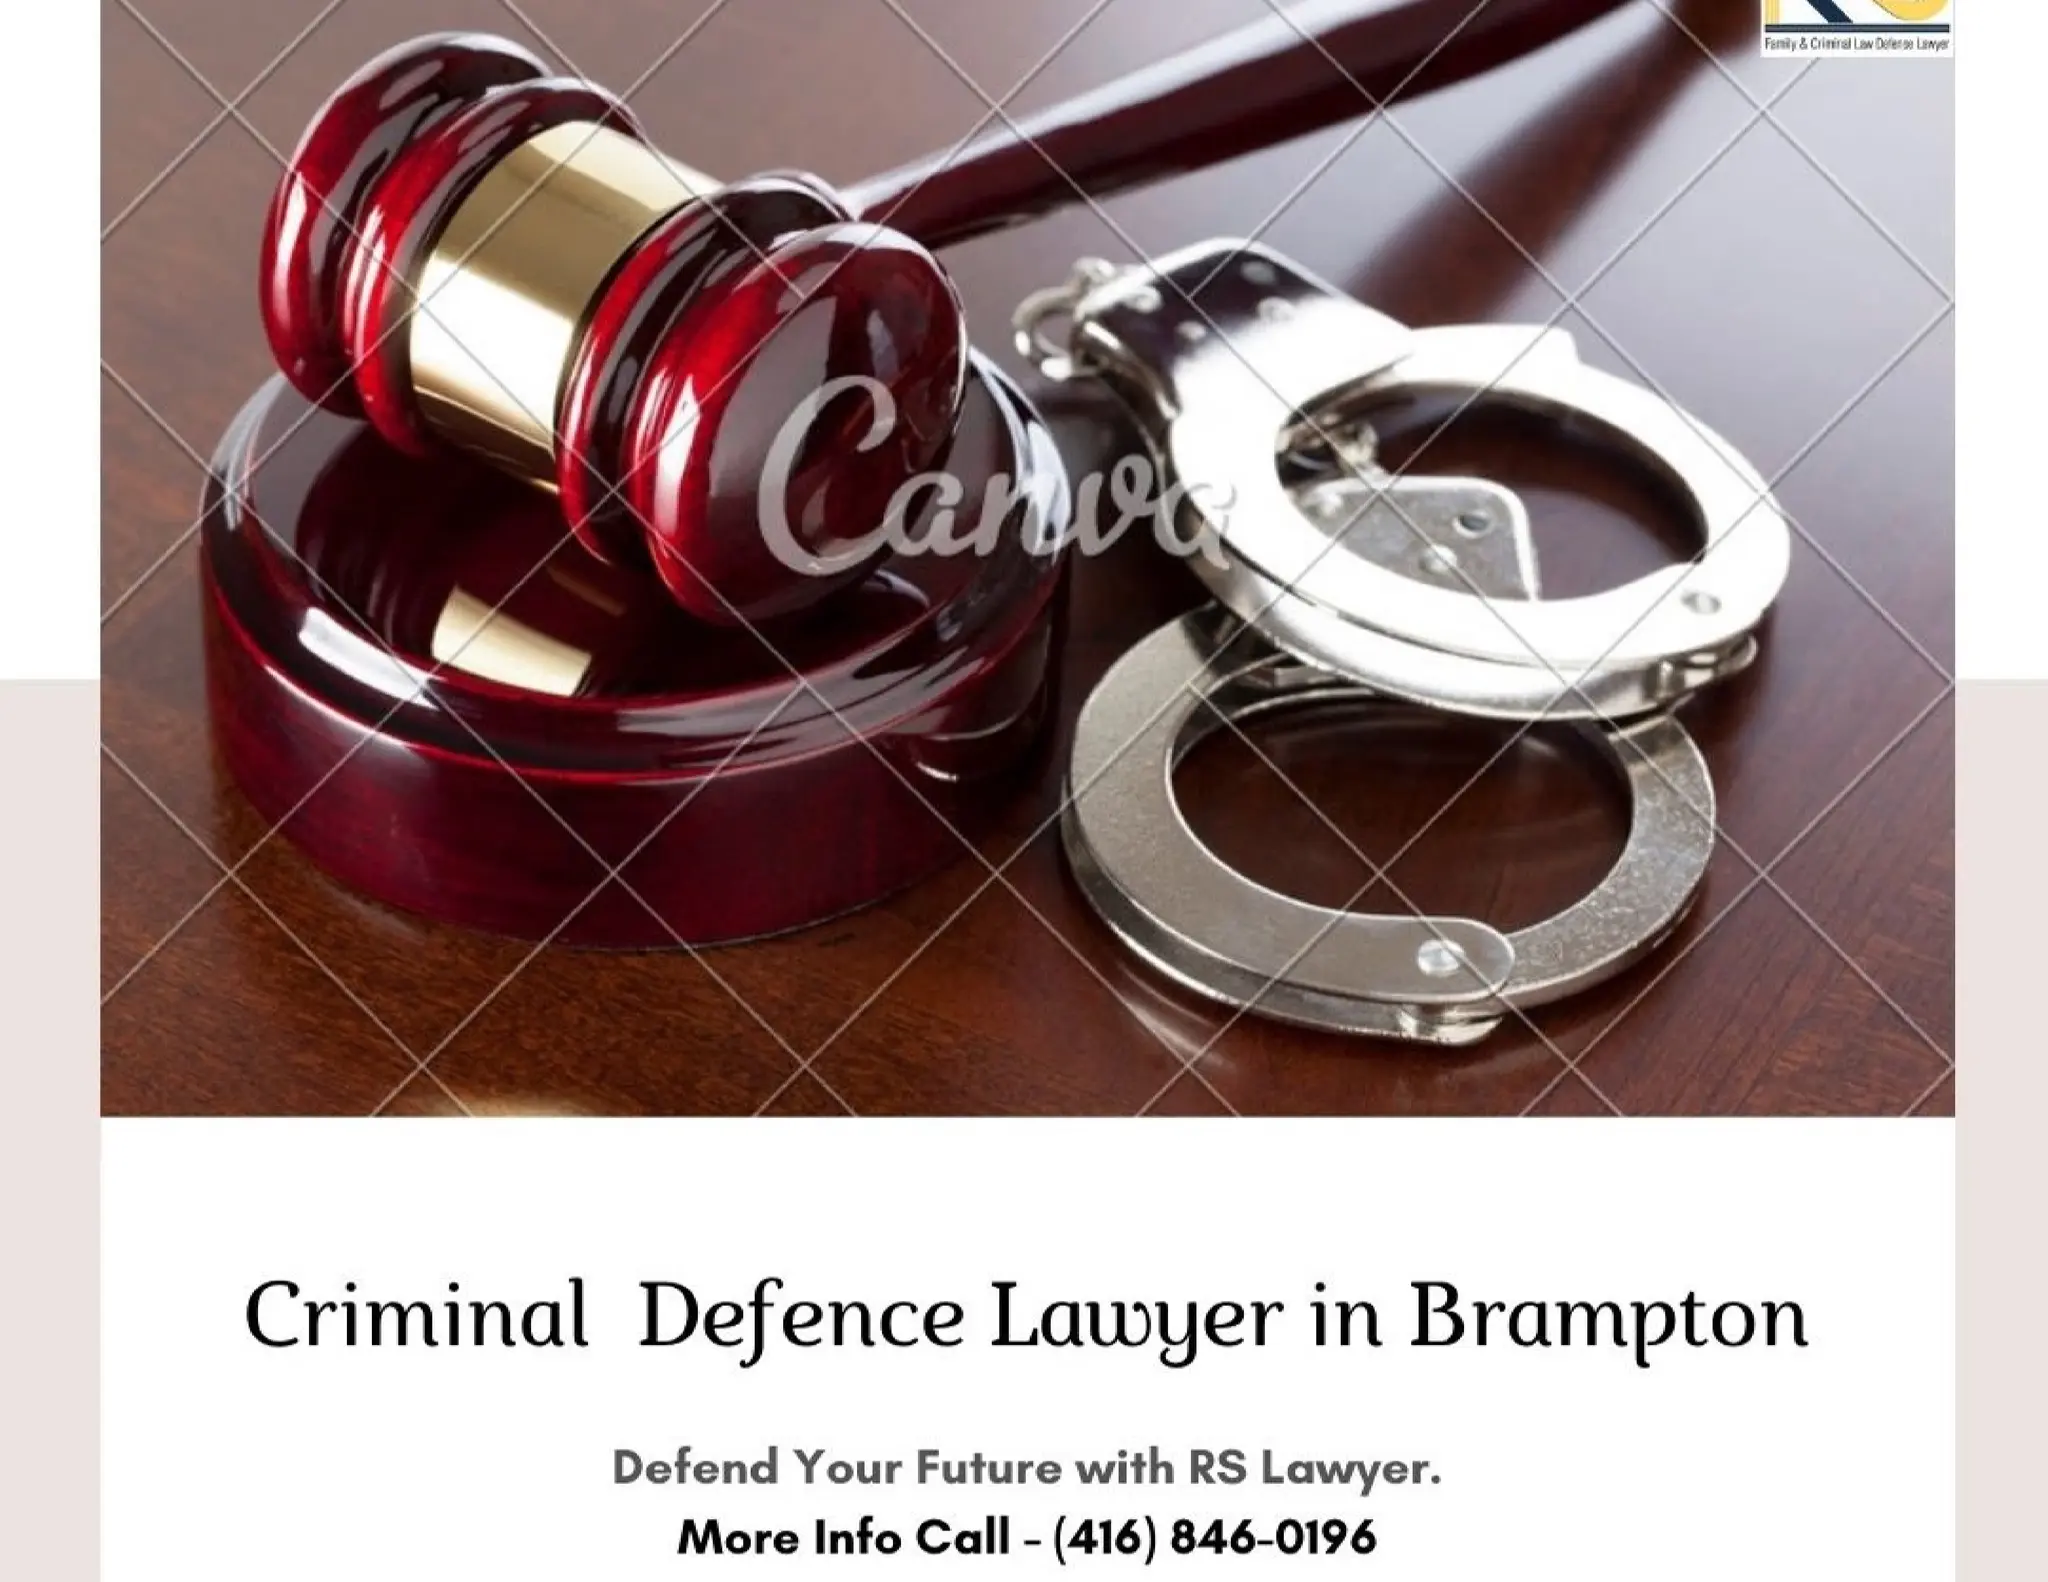 THE BEST 10 Criminal Defense Law in BRAMPTON - RS Lawyer | PPT